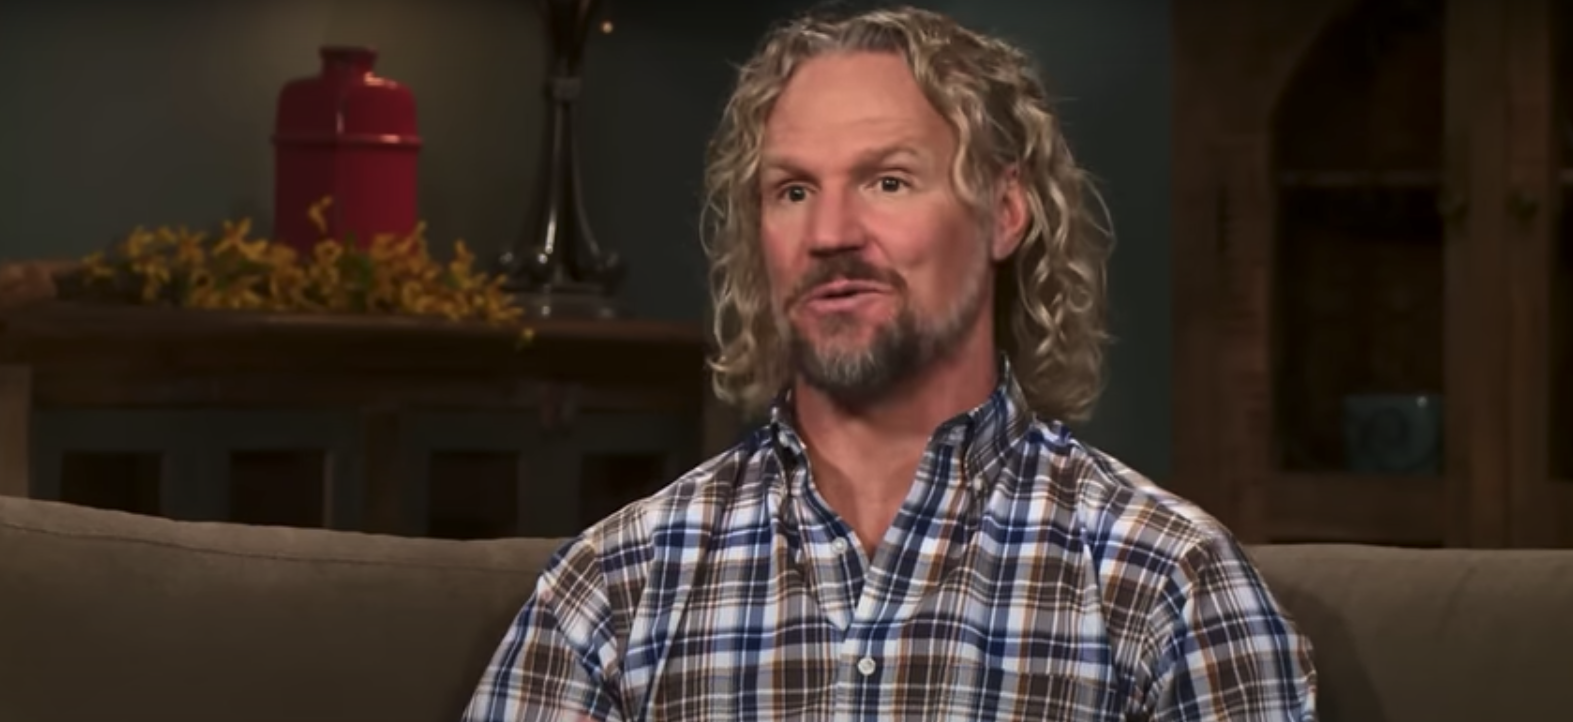 Kody Brown wearing a plaid shirt in an episode of 'Sister Wives'